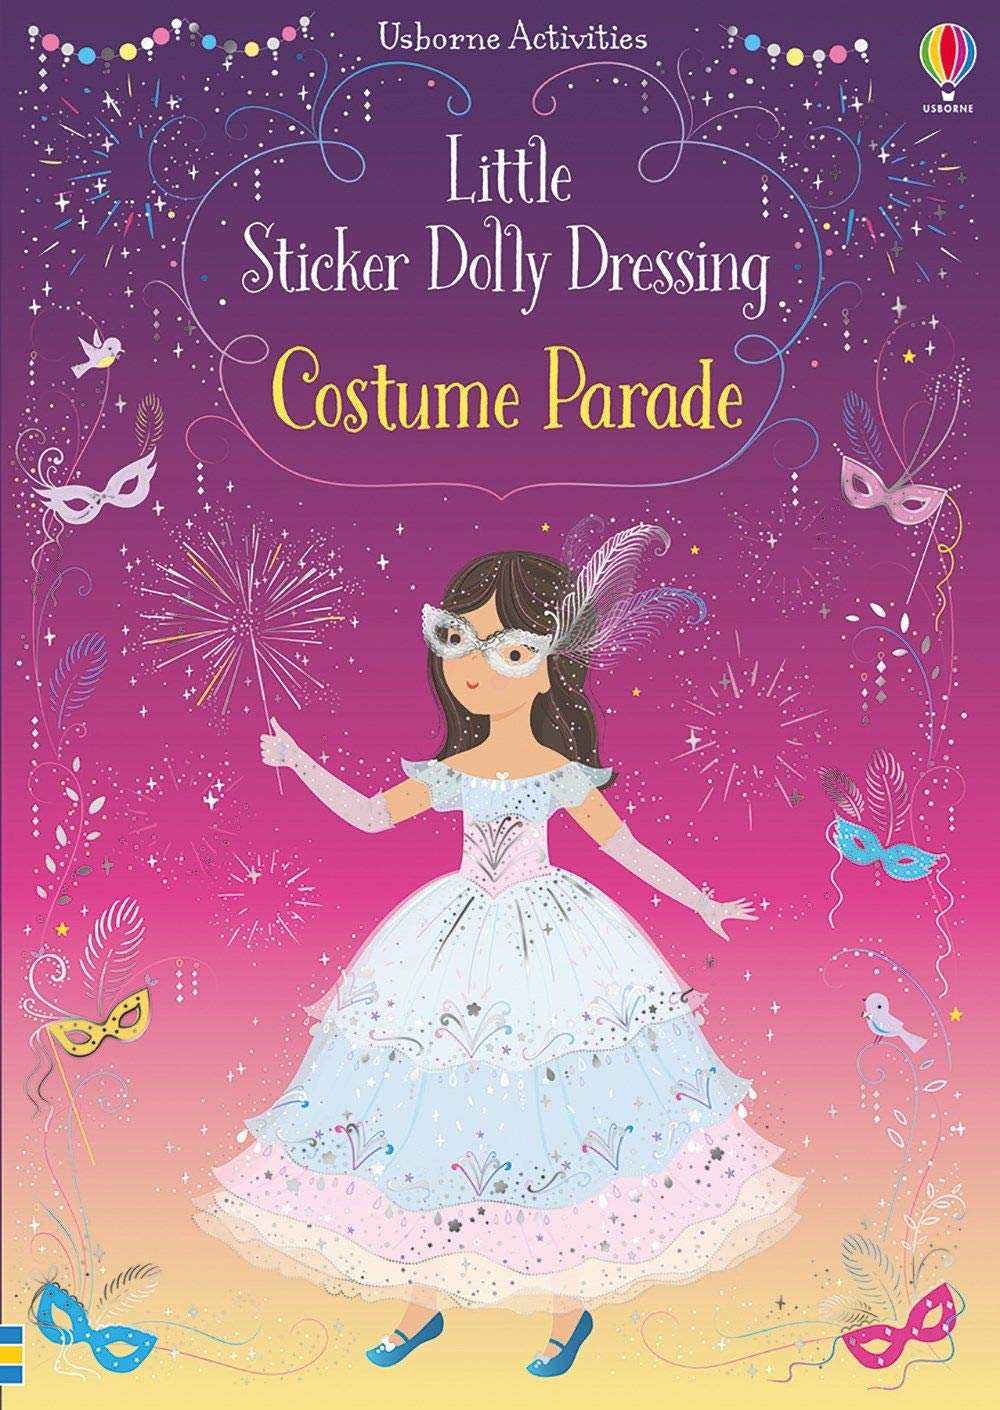 Little Sticker Dolly Dressing: Costume Parade